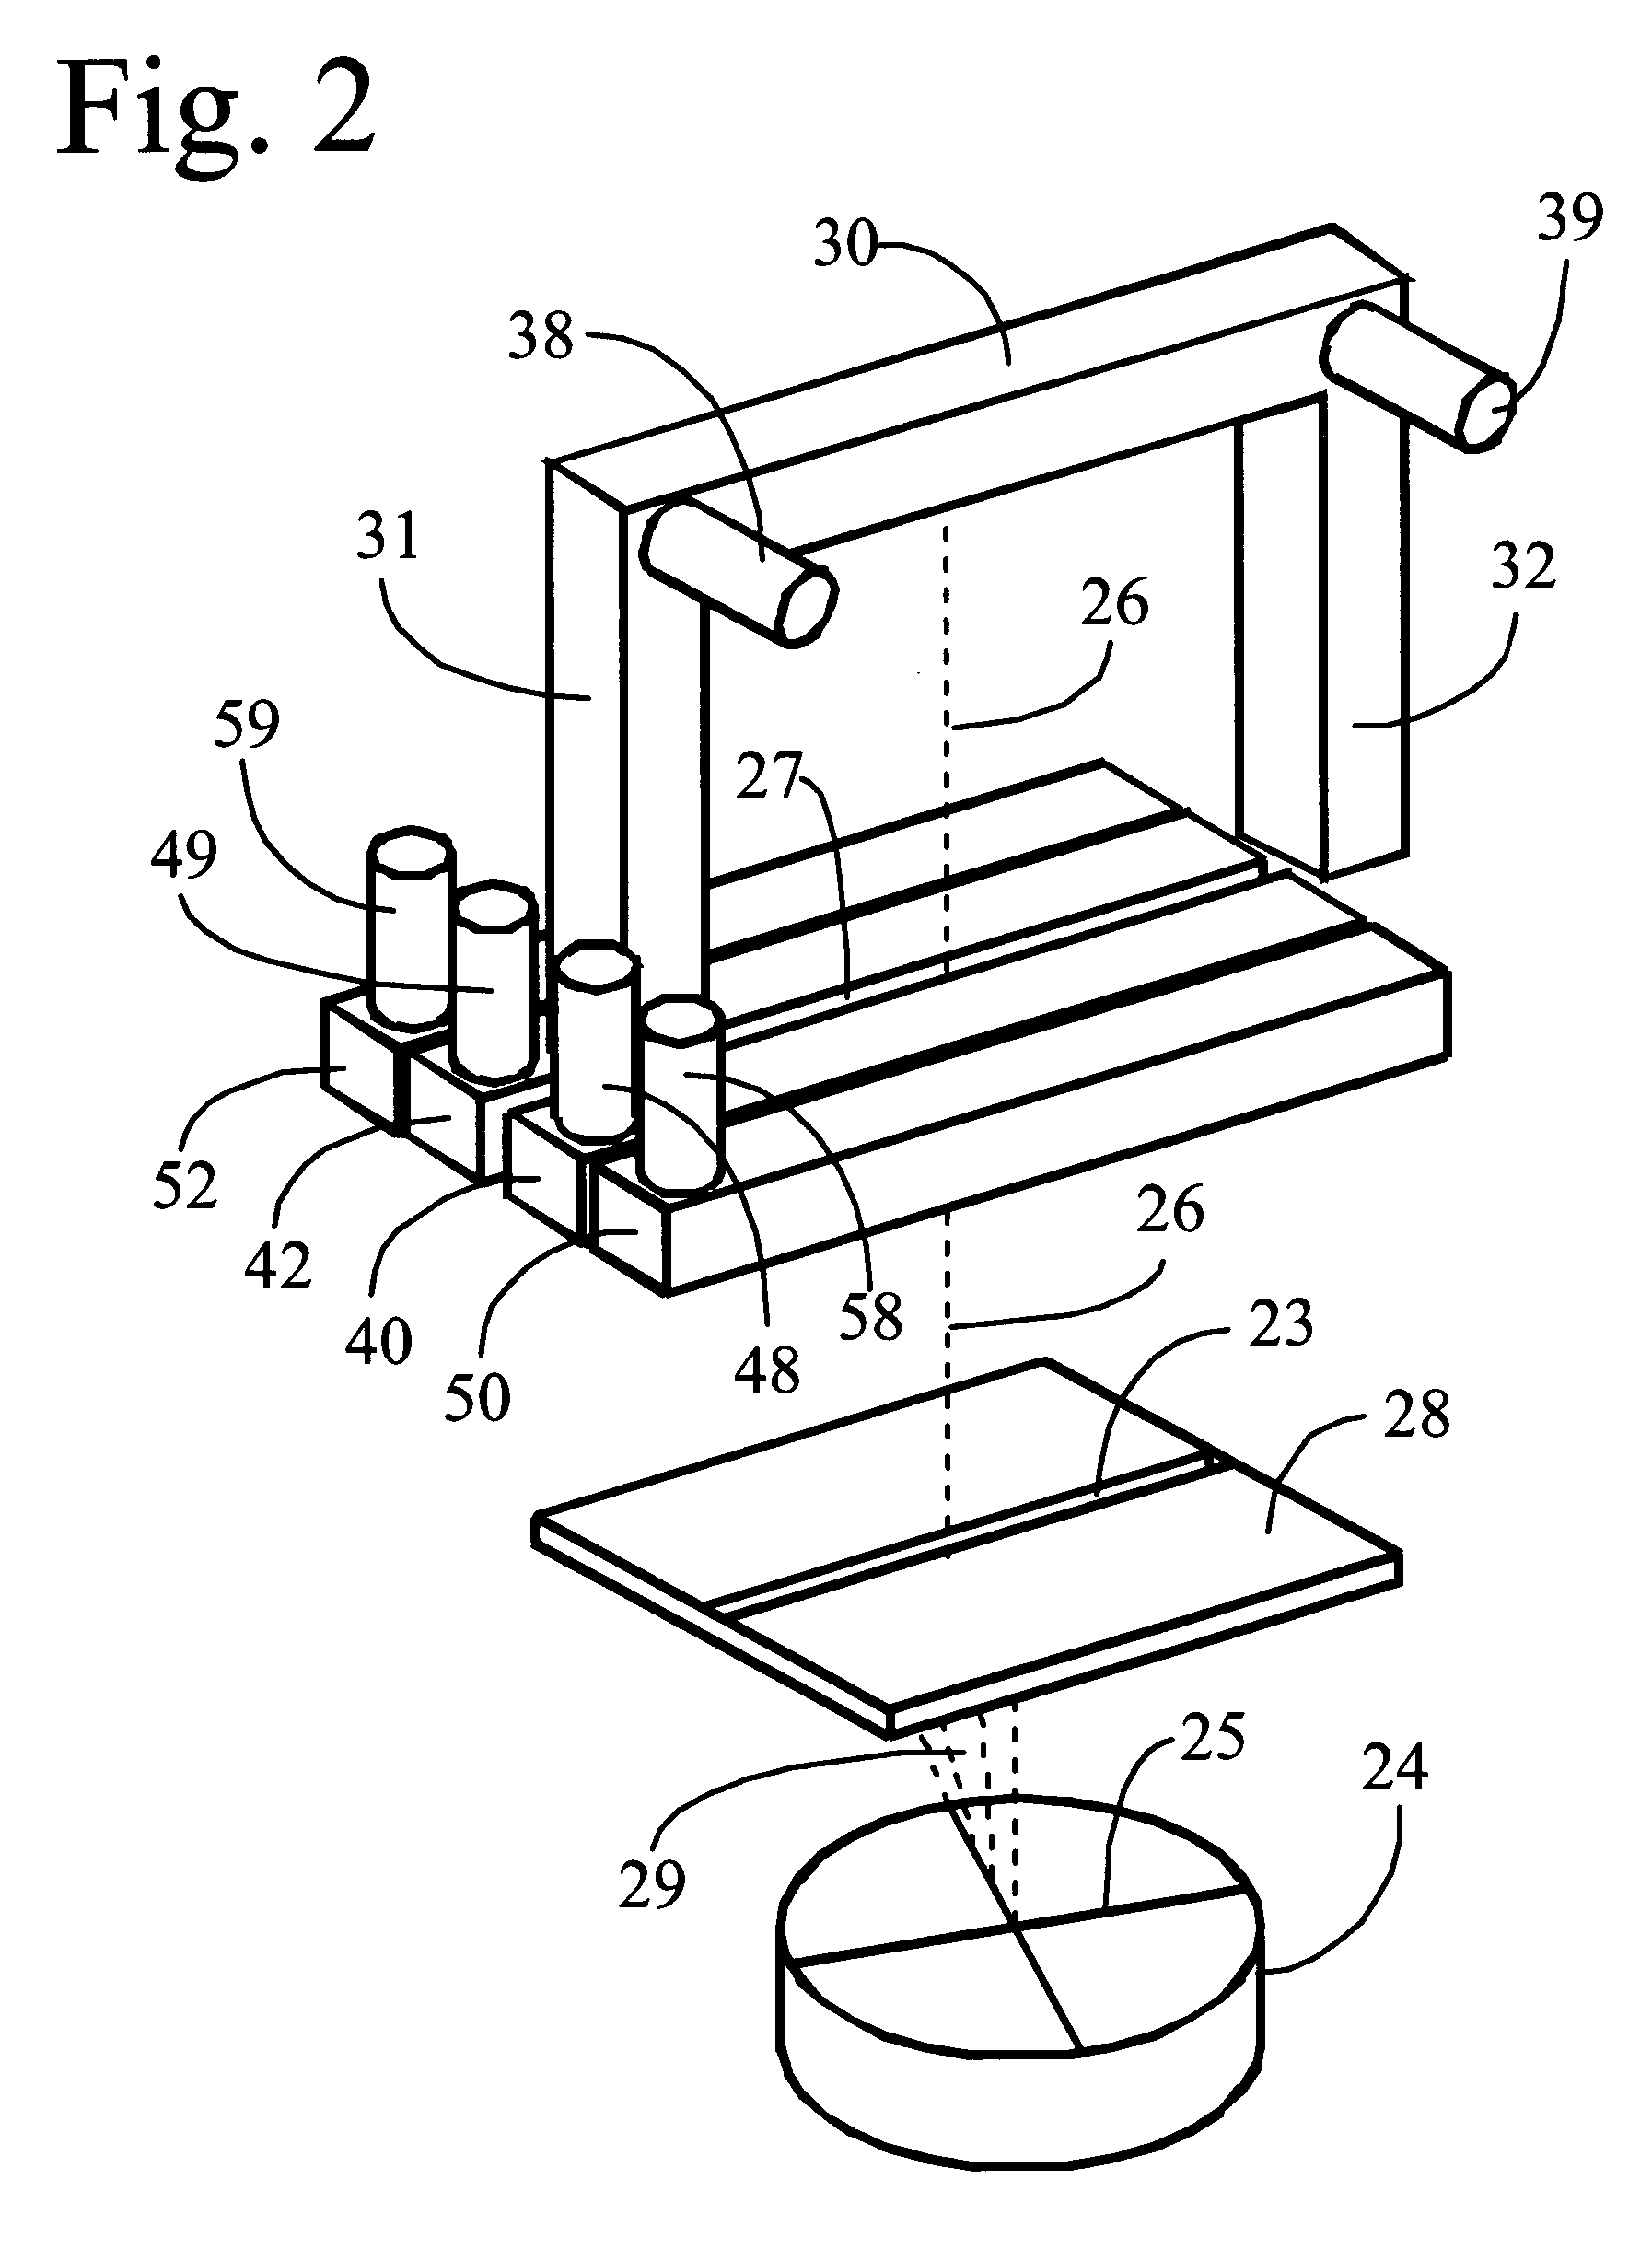 Tomographic scanning X-ray inspection system using transmitted and compton scattered radiation